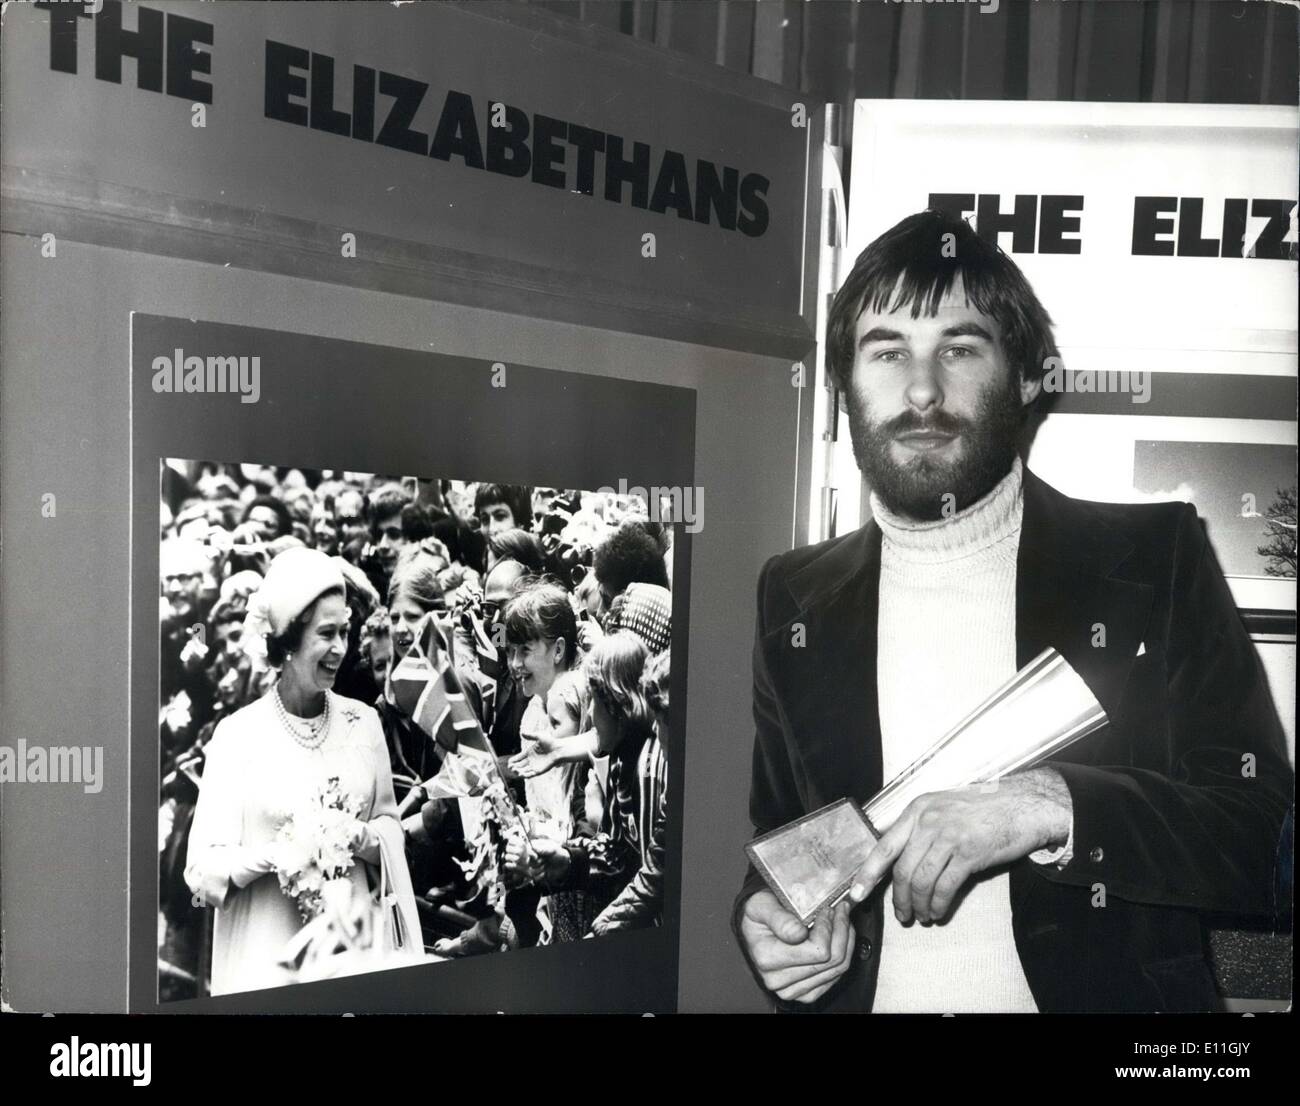 Nov. 30, 1977 - Photographer Of The Year Dave Ashdown Of Keystone: Wit his picture Keystone Cameraman Dave Ashdown, won the title Ilford photographer of the year and the award of 1,000 in this year's special ''Elizabethan Category''. Photo shows 26-year old Dave Ashdown the Keystone photographer seen with his trophy and his award winning picture which won him the title of the ''Ilford photographer of the year'' in London last night. Stock Photo